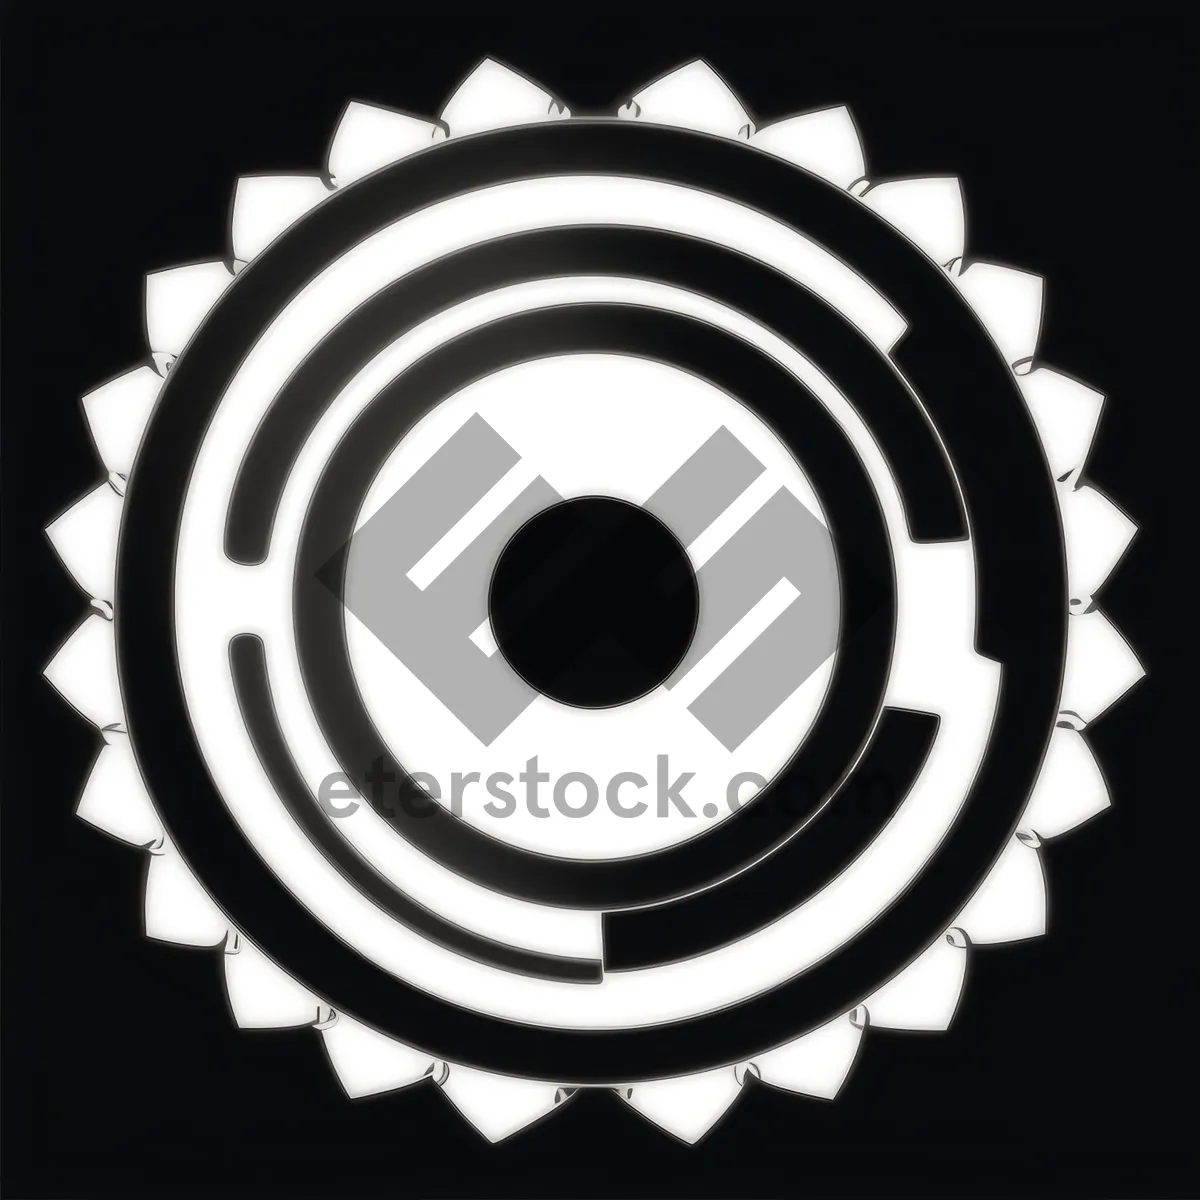 Picture of Industrial Gear Icon: Mechanism of Power and Machine Technology